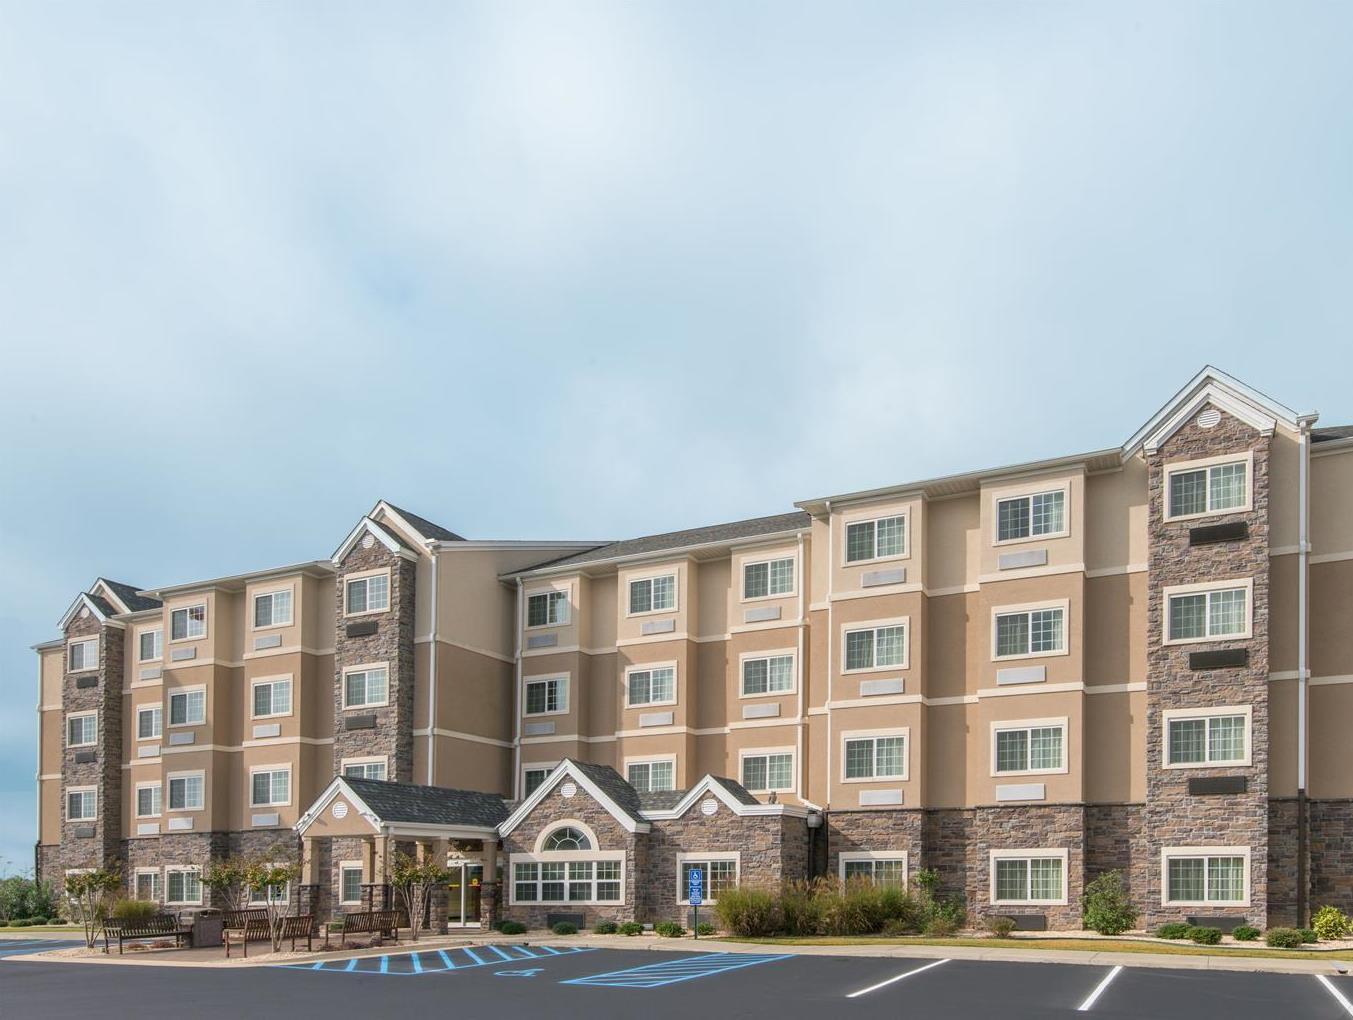 Microtel Inn And Suites By Wyndham Opelika Exterior photo